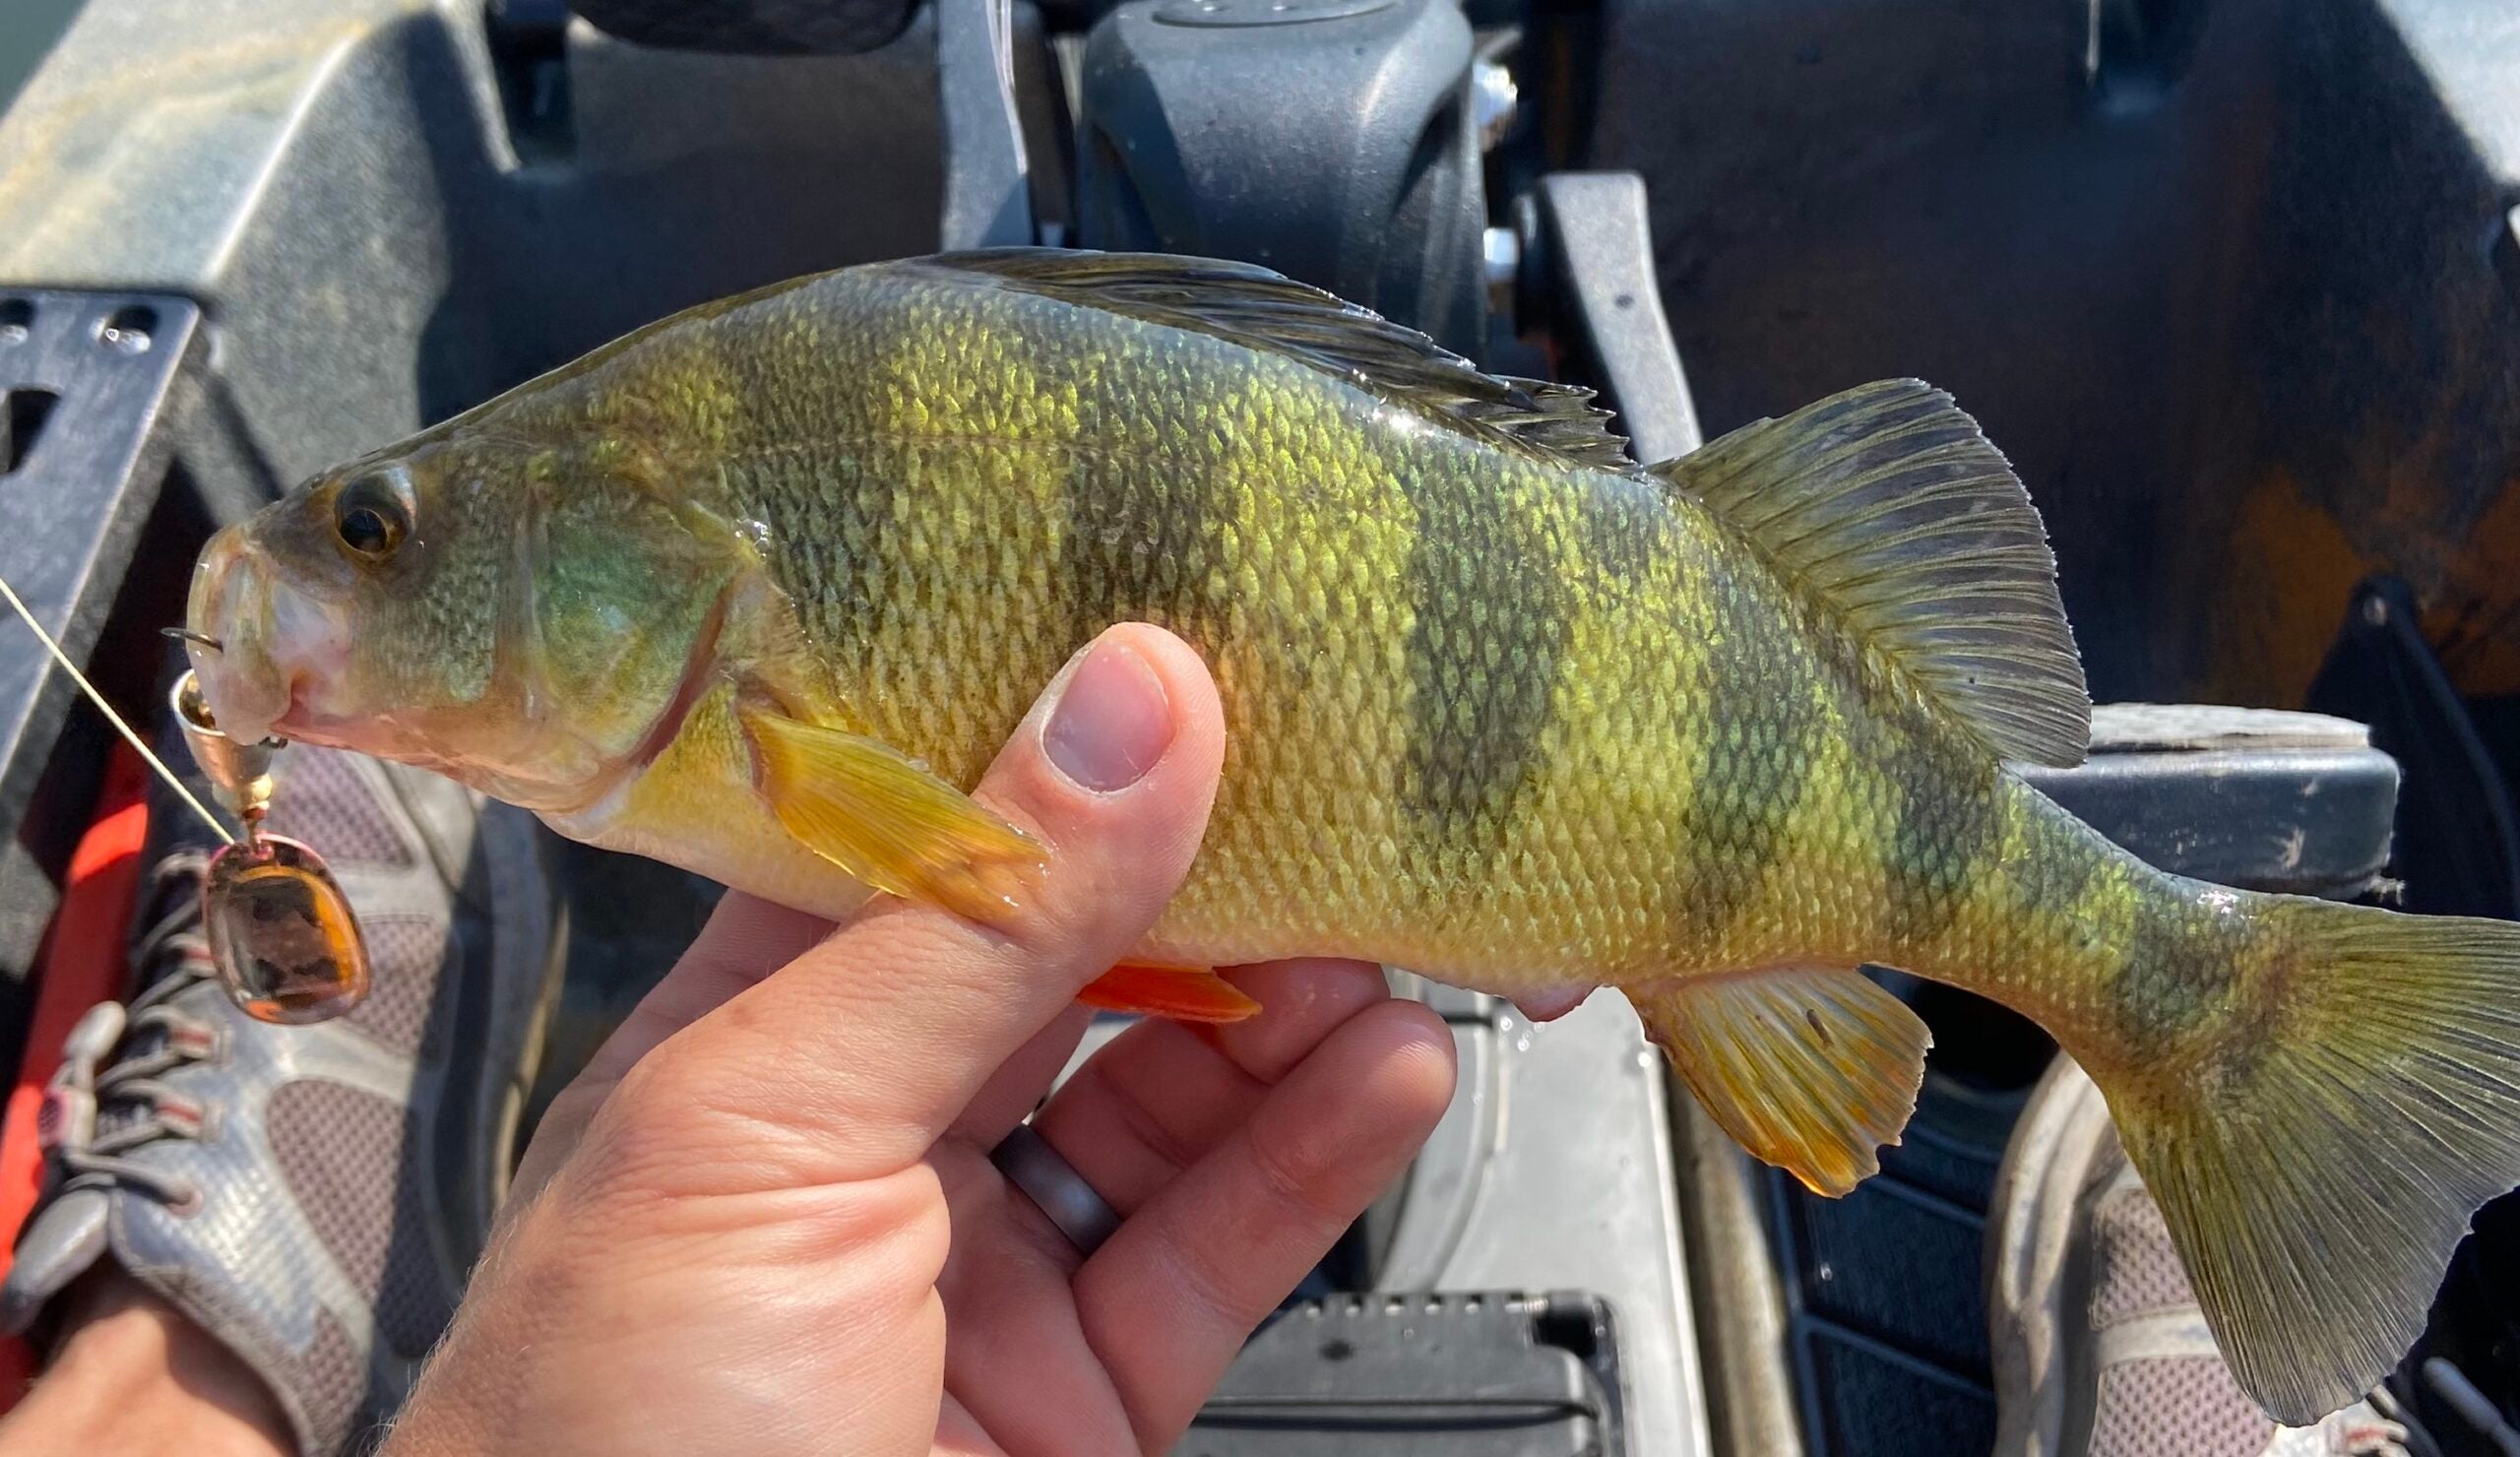 fisherman holds a yellow perchâa popular freshwater fish.